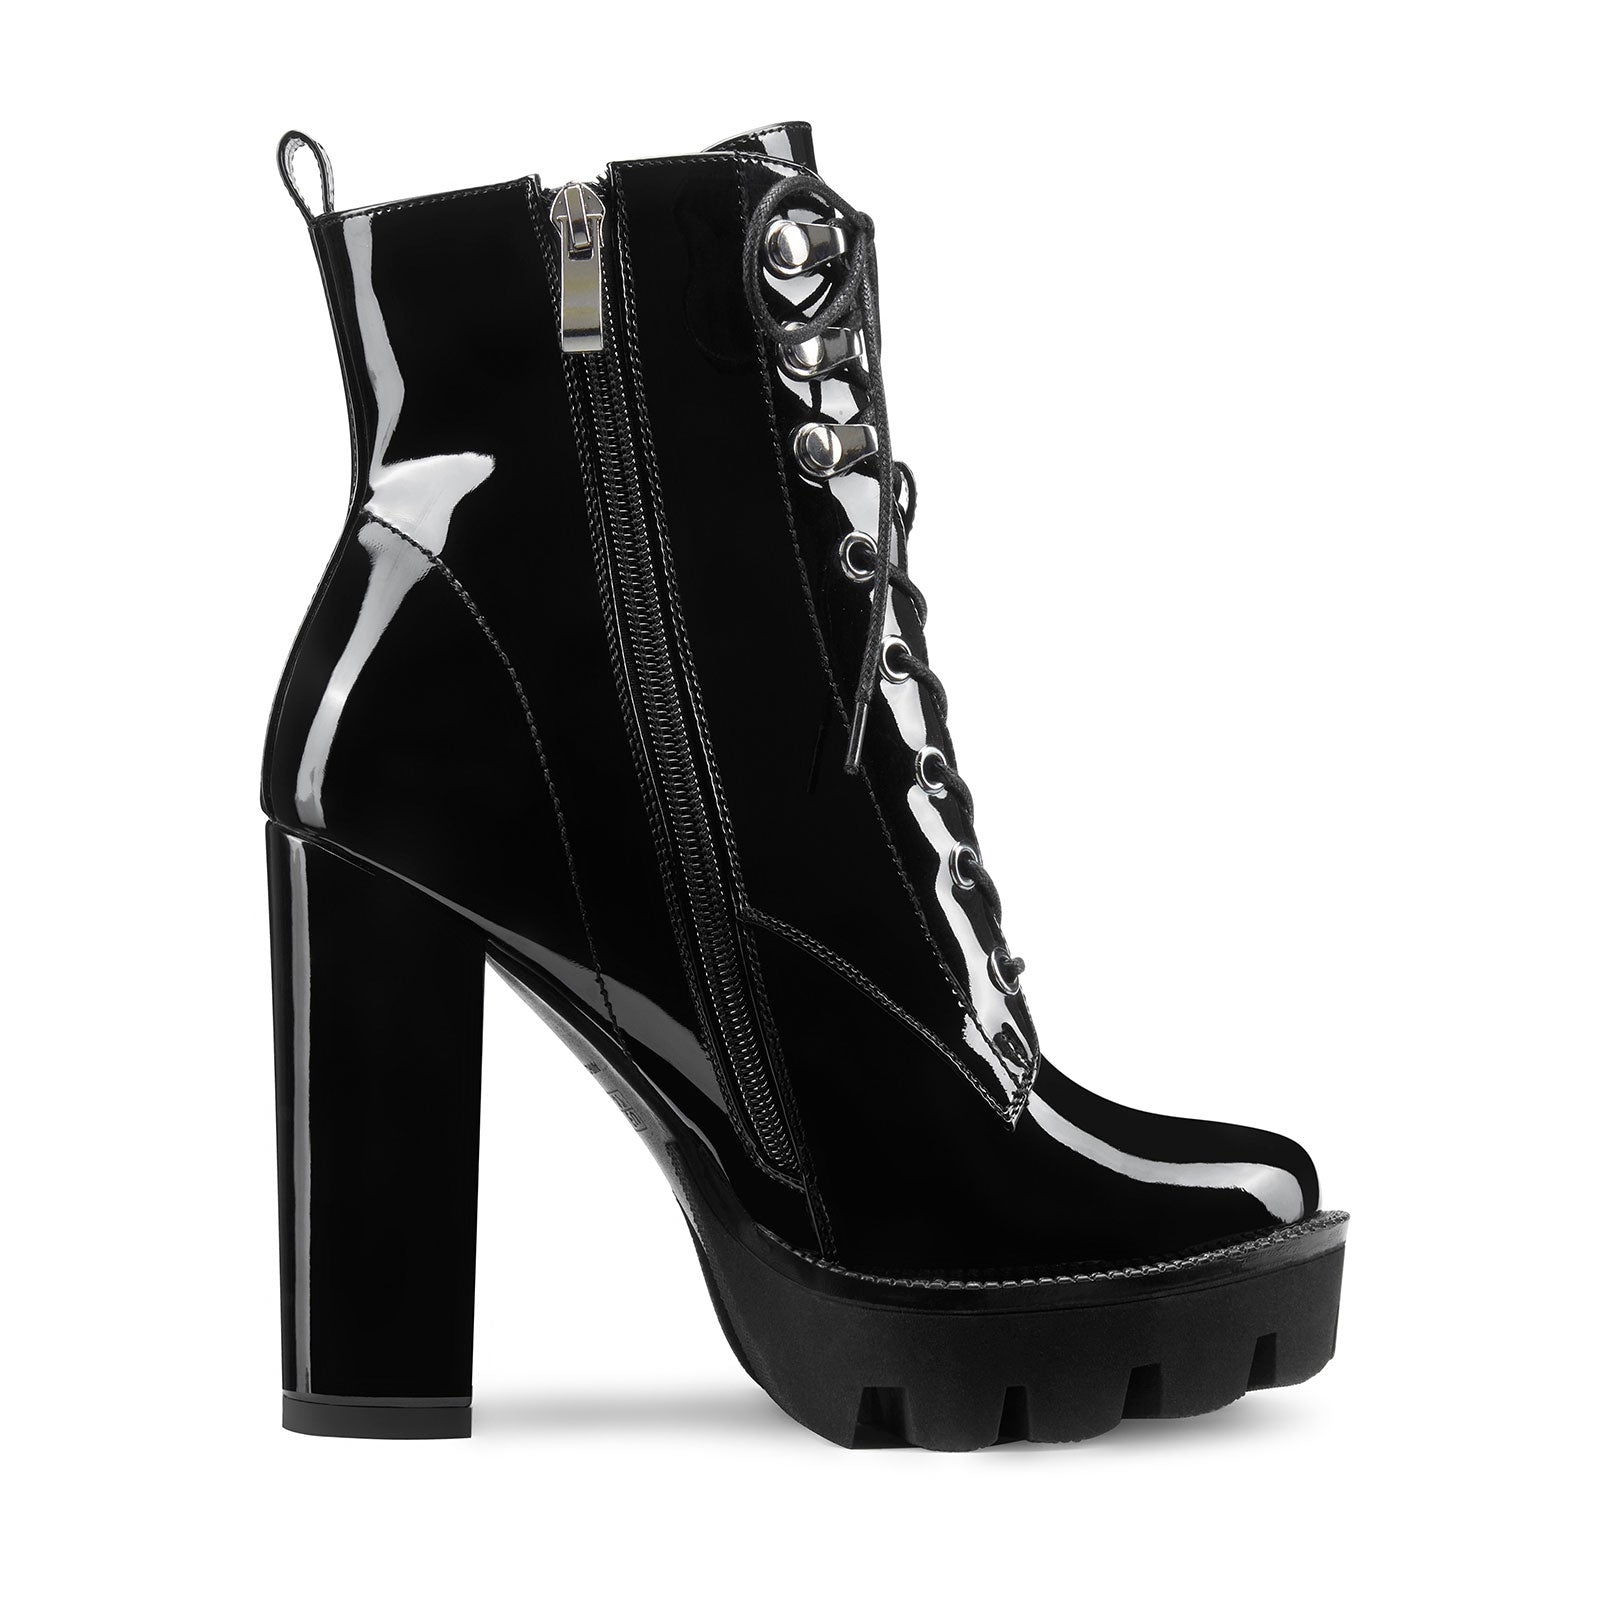 Women's Round-Toe High Heel Platform Ankle Boots with Zipper, 4.7